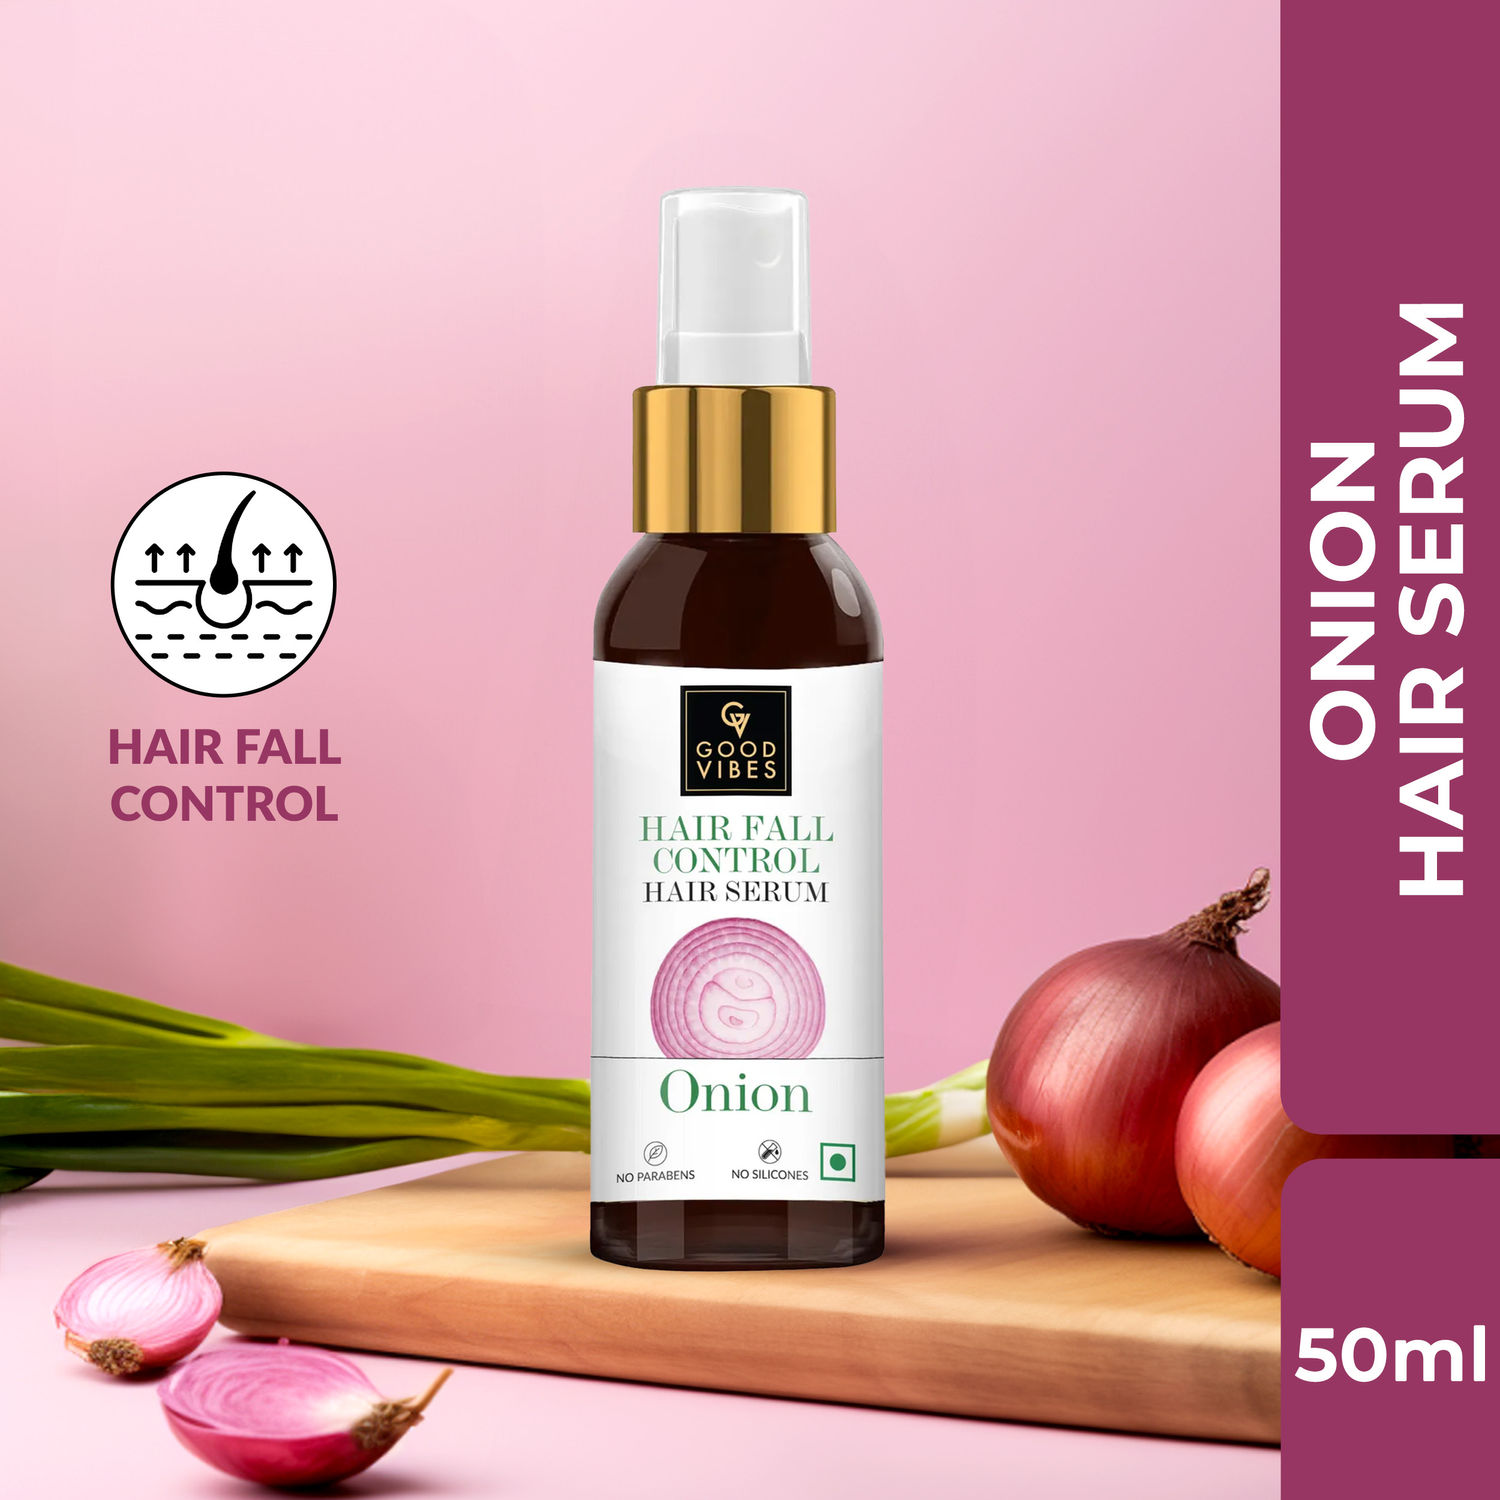 Buy Good Vibes Onion Hair Fall Control Hair Serum | Hair Growth, Strenghtening | No Parabens, No Sulphates, No Animal Testing (50ml) - Purplle